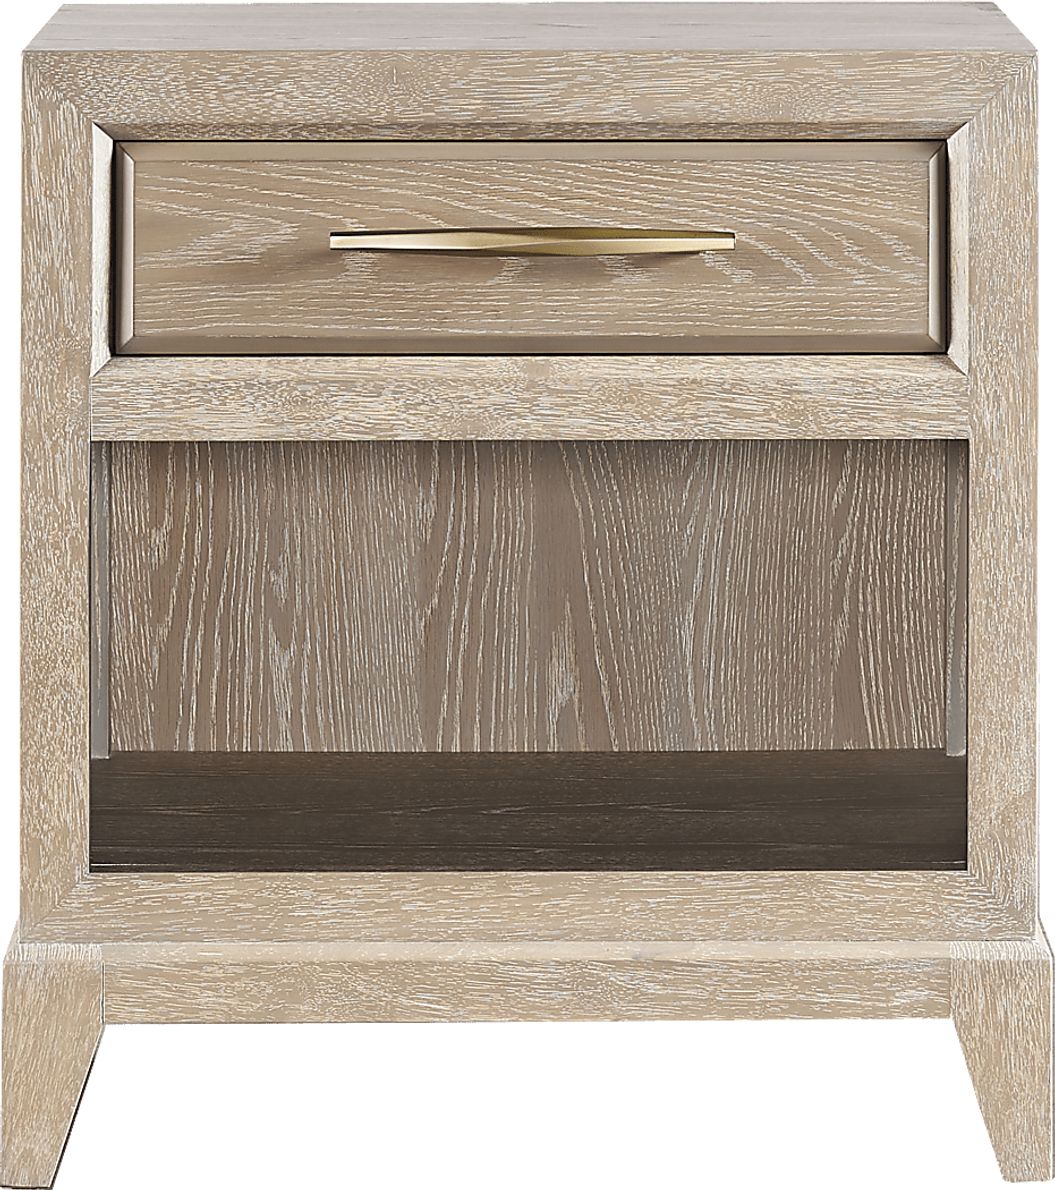 Cindy Crawford Home Kailey Park Light Oak Nightstand